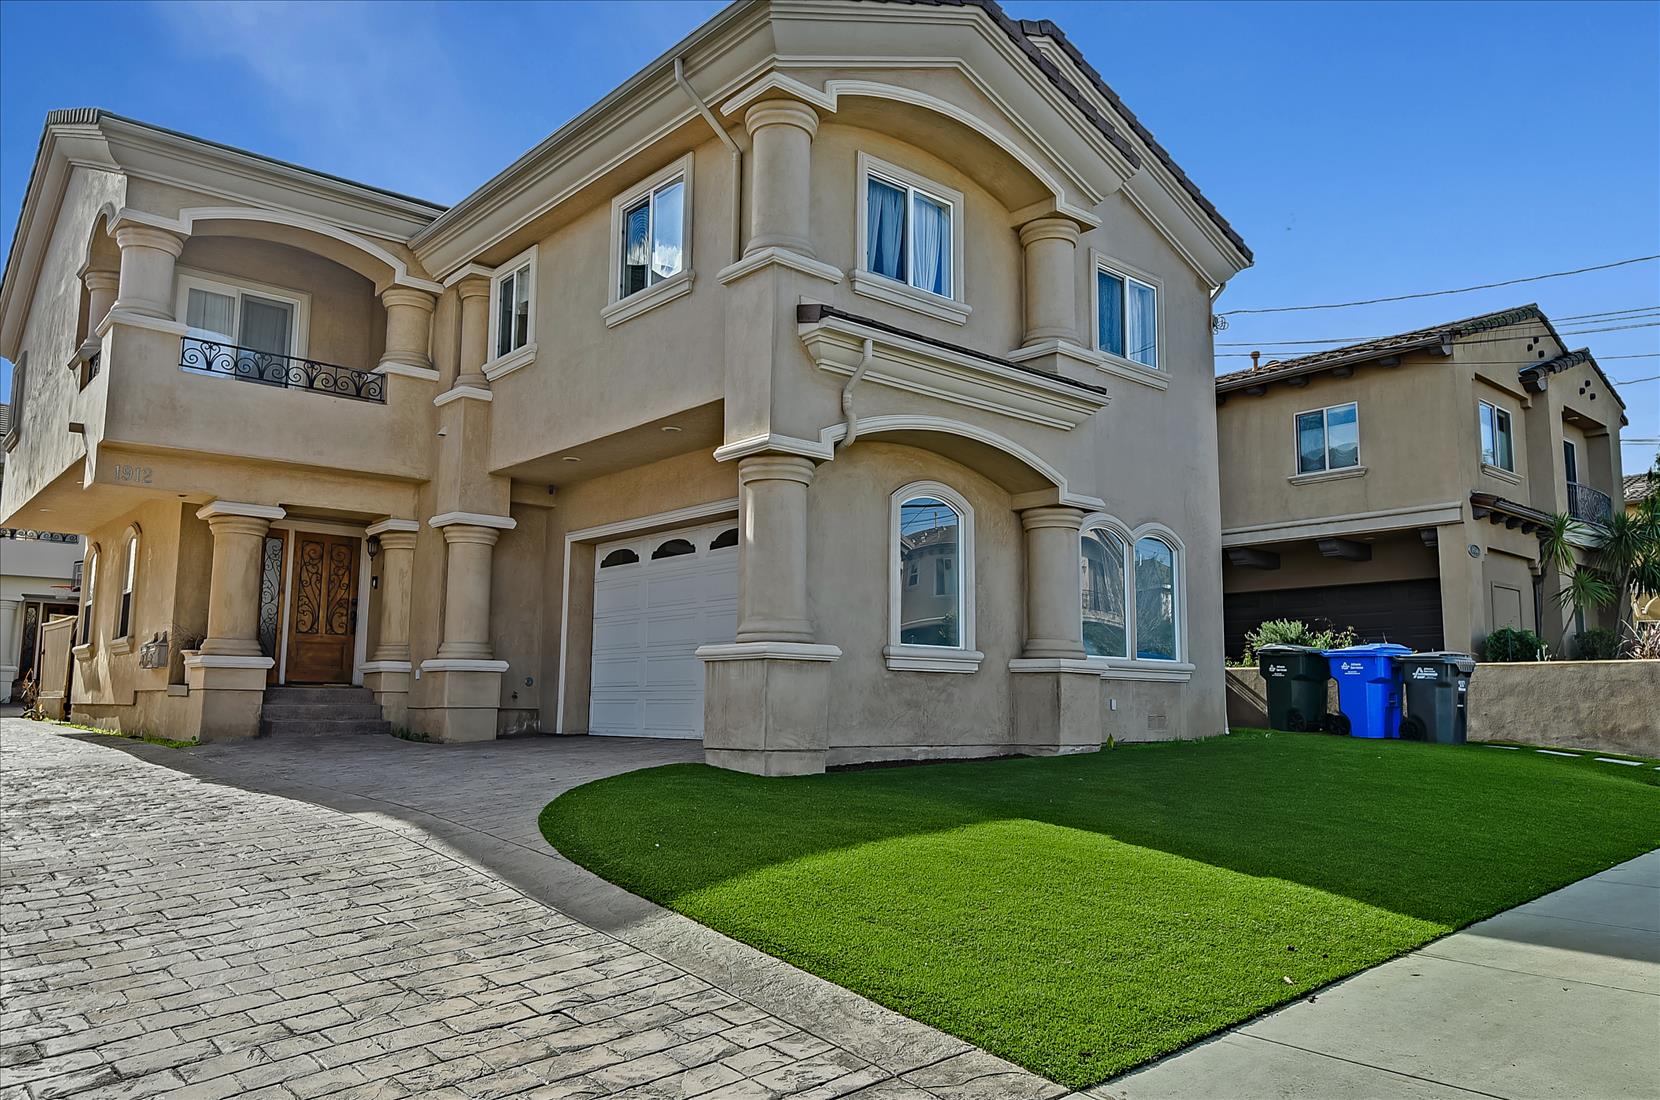 Beautiful Carson, CA house showcasing the best property management services